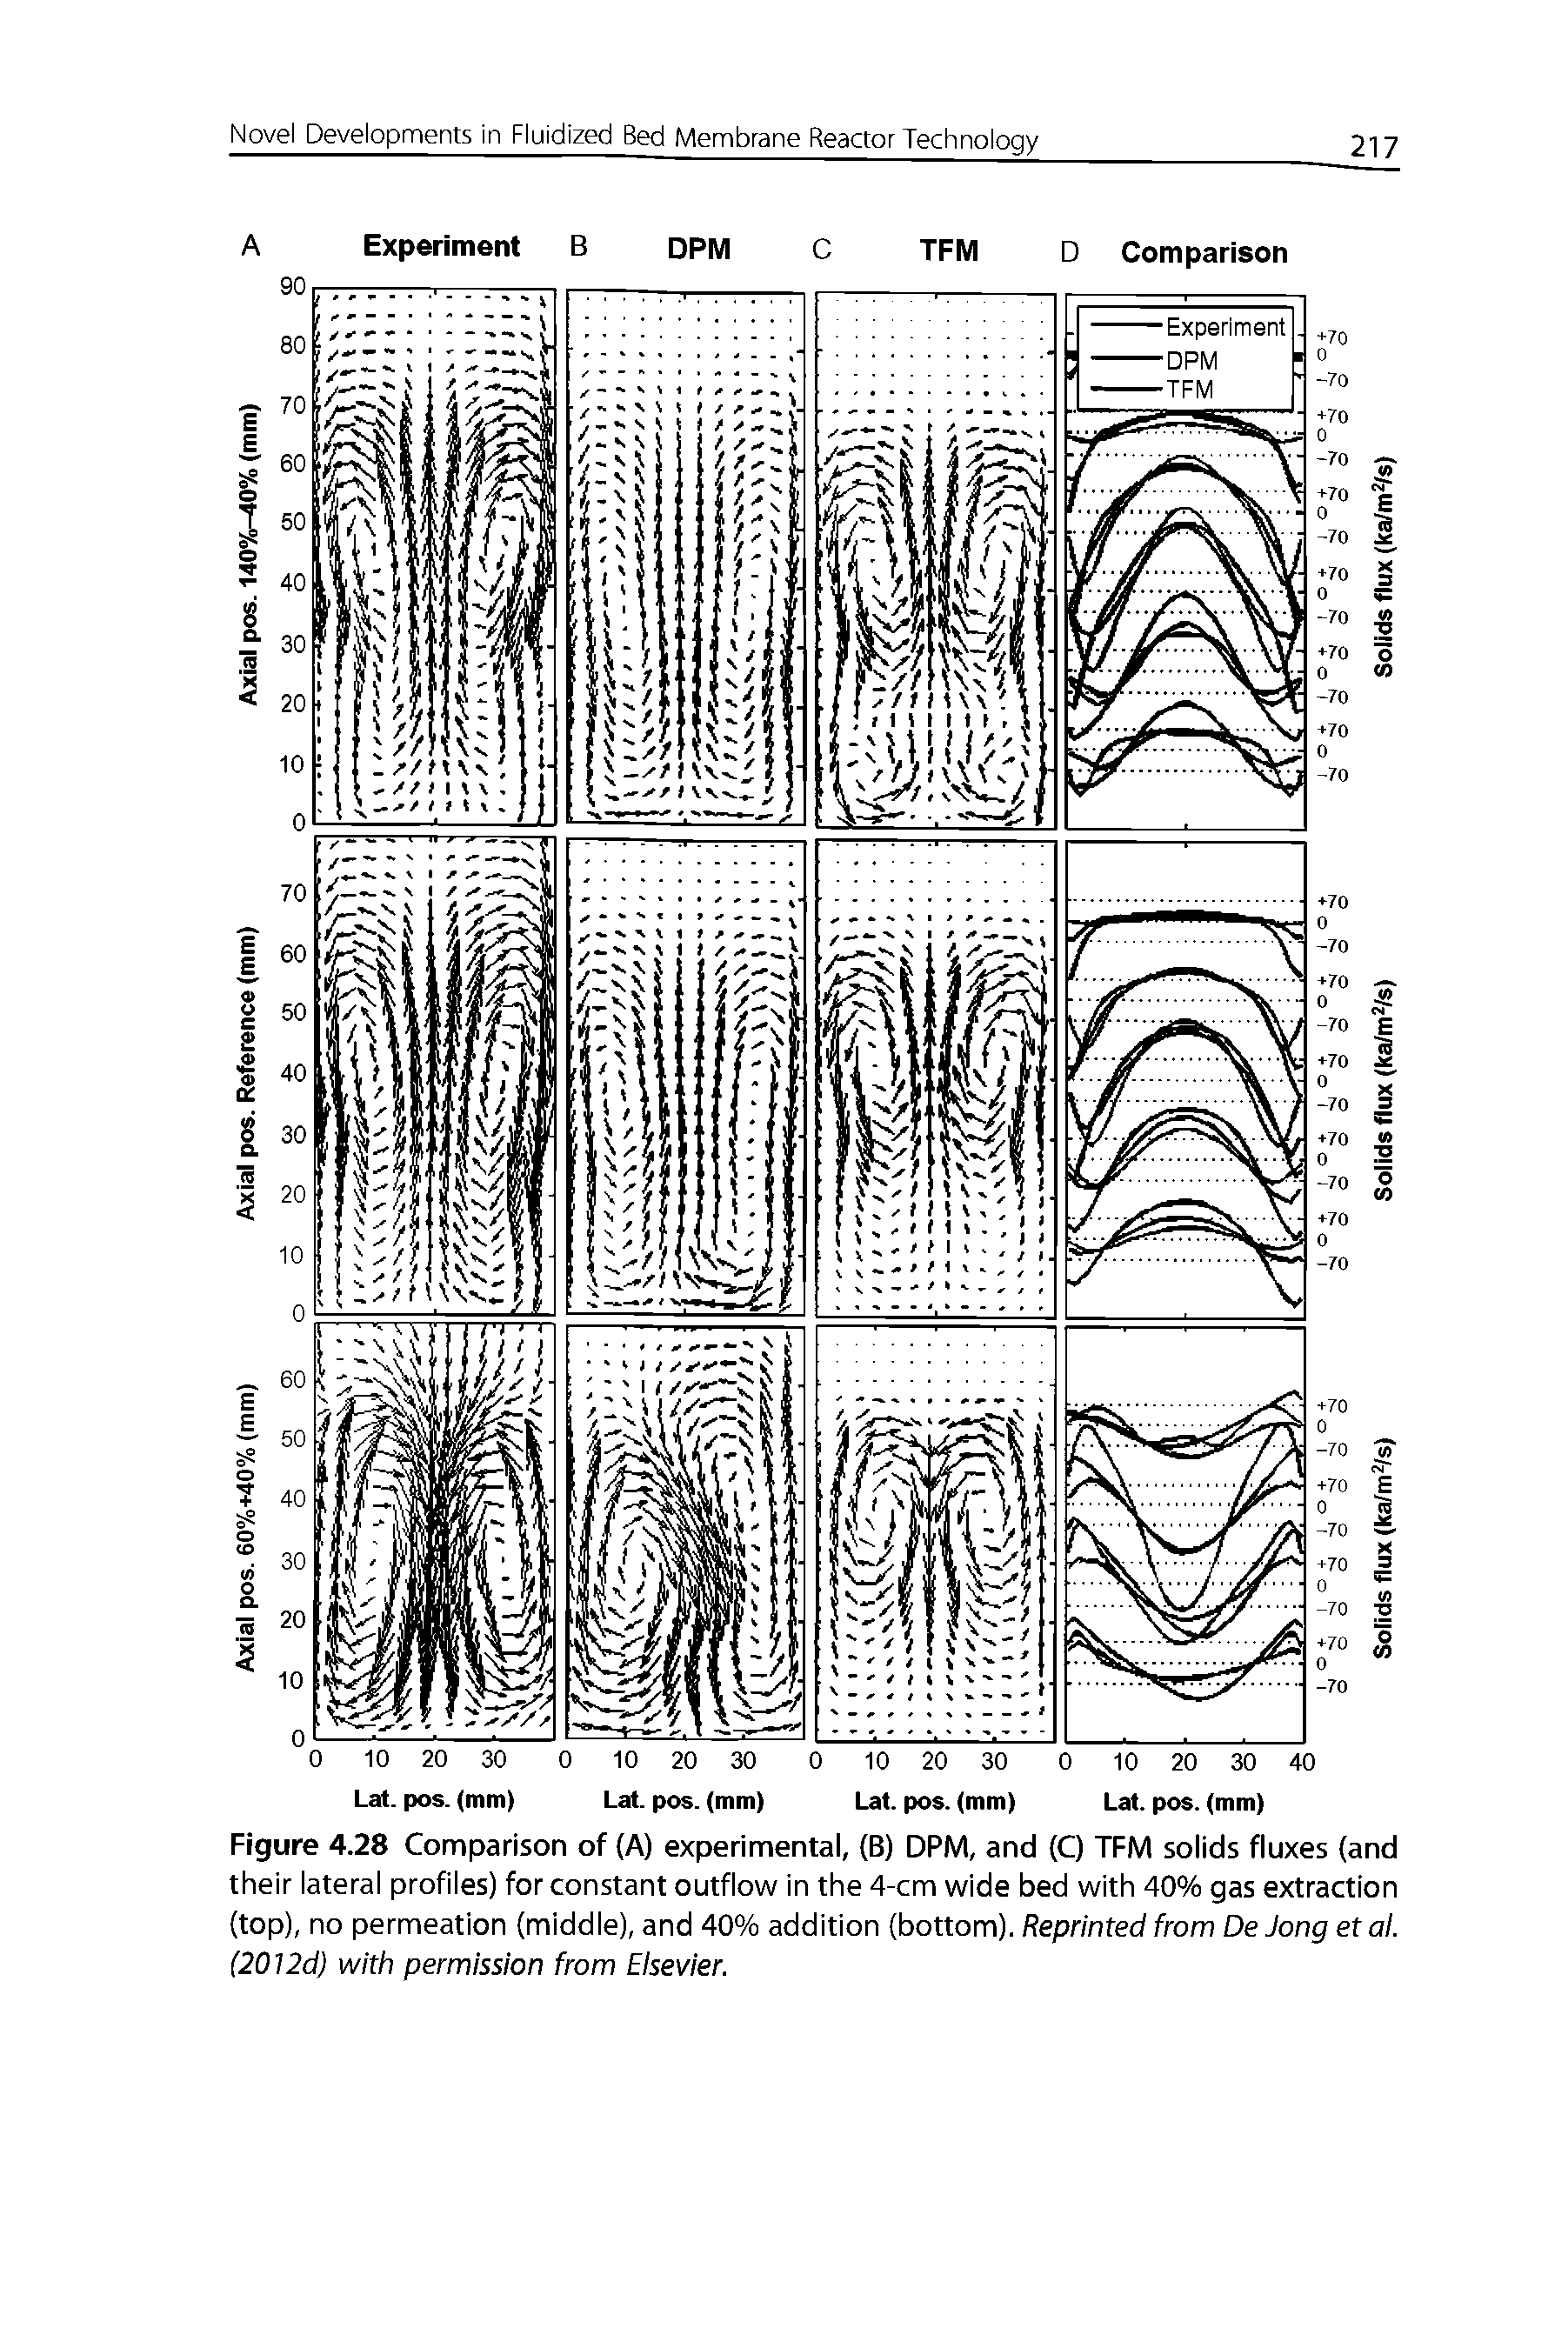 Figure 4.28 Comparison of (A) experimental, (B) DPM, and (C) TFM solids fluxes (and their lateral profiles) for constant outflow in the 4-cm wide bed with 40% gas extraction (top), no permeation (middle), and 40% addition (bottom). Reprinted from De Jong et al. (2012d) with permission from Elsevier.